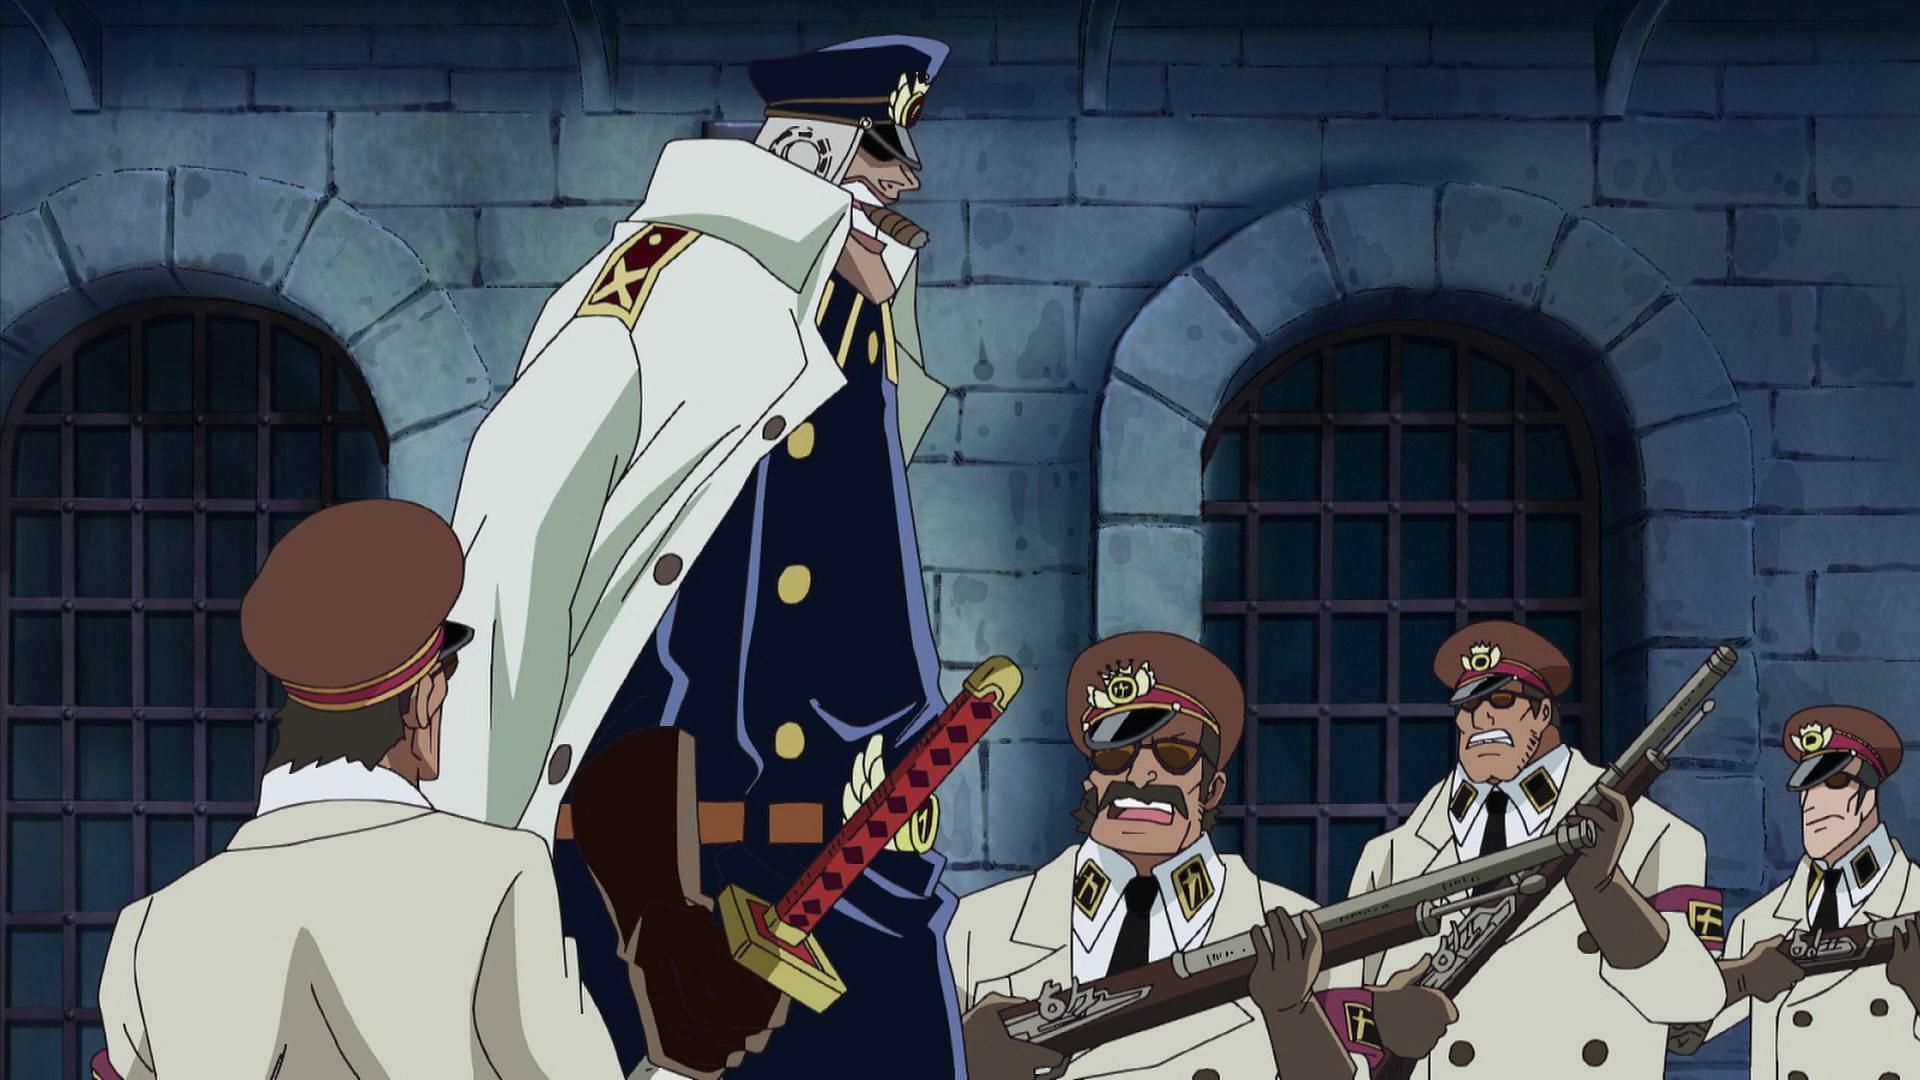 Shiryu is a cold-blooded murderer (Image via Toei Animation, One Piece)